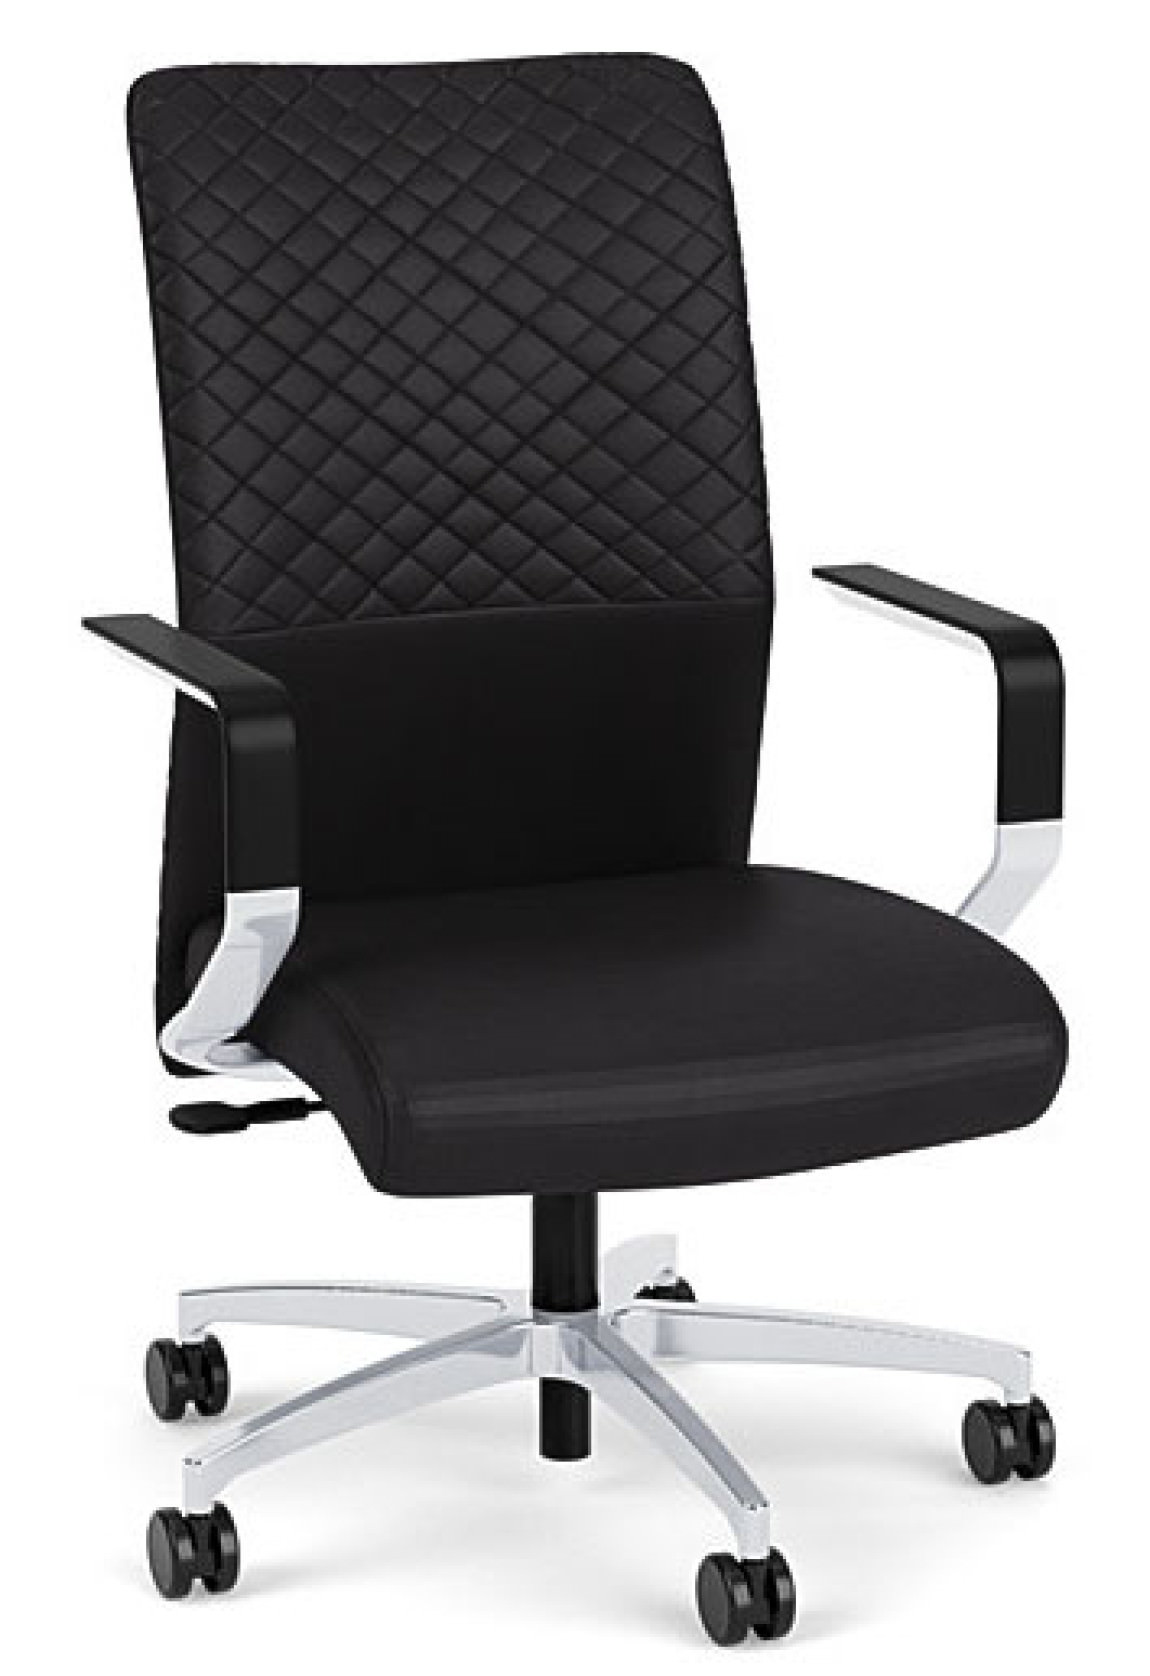 Finding the Best Conference Room Chairs for your Meeting Space